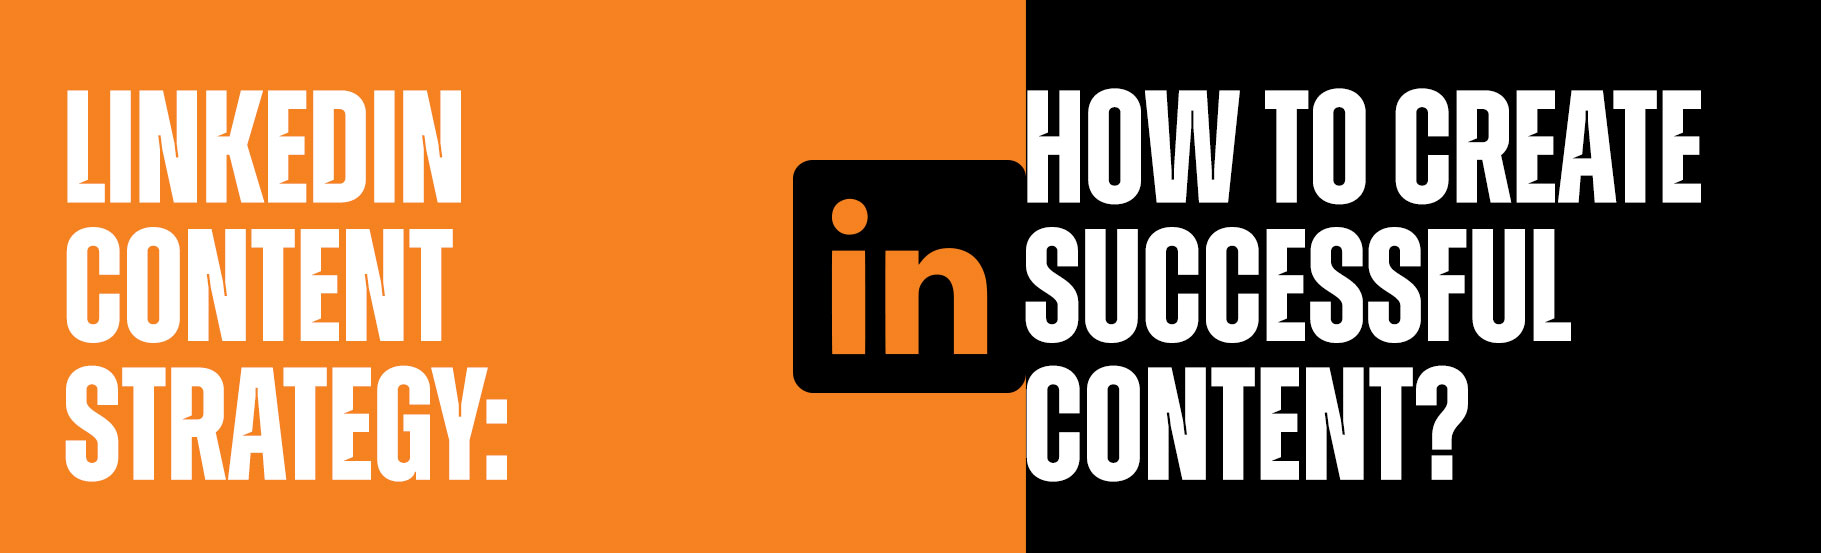 LinkedIn content strategy: How to create successful content?